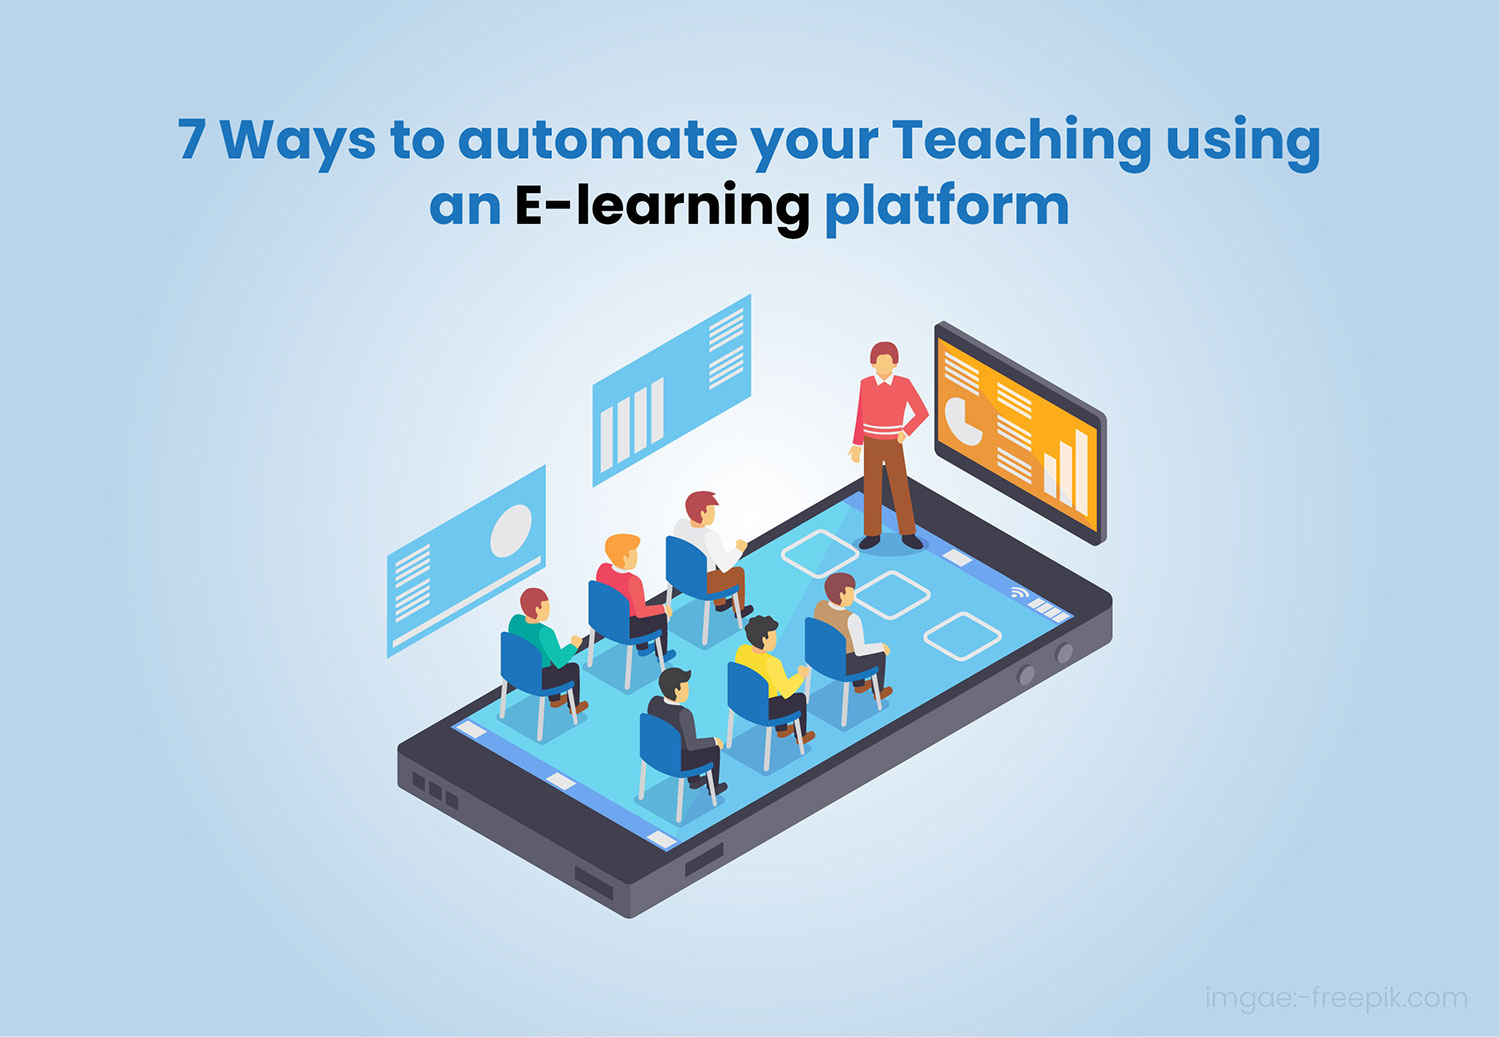 Automate Your Teaching using E-Learning Platform